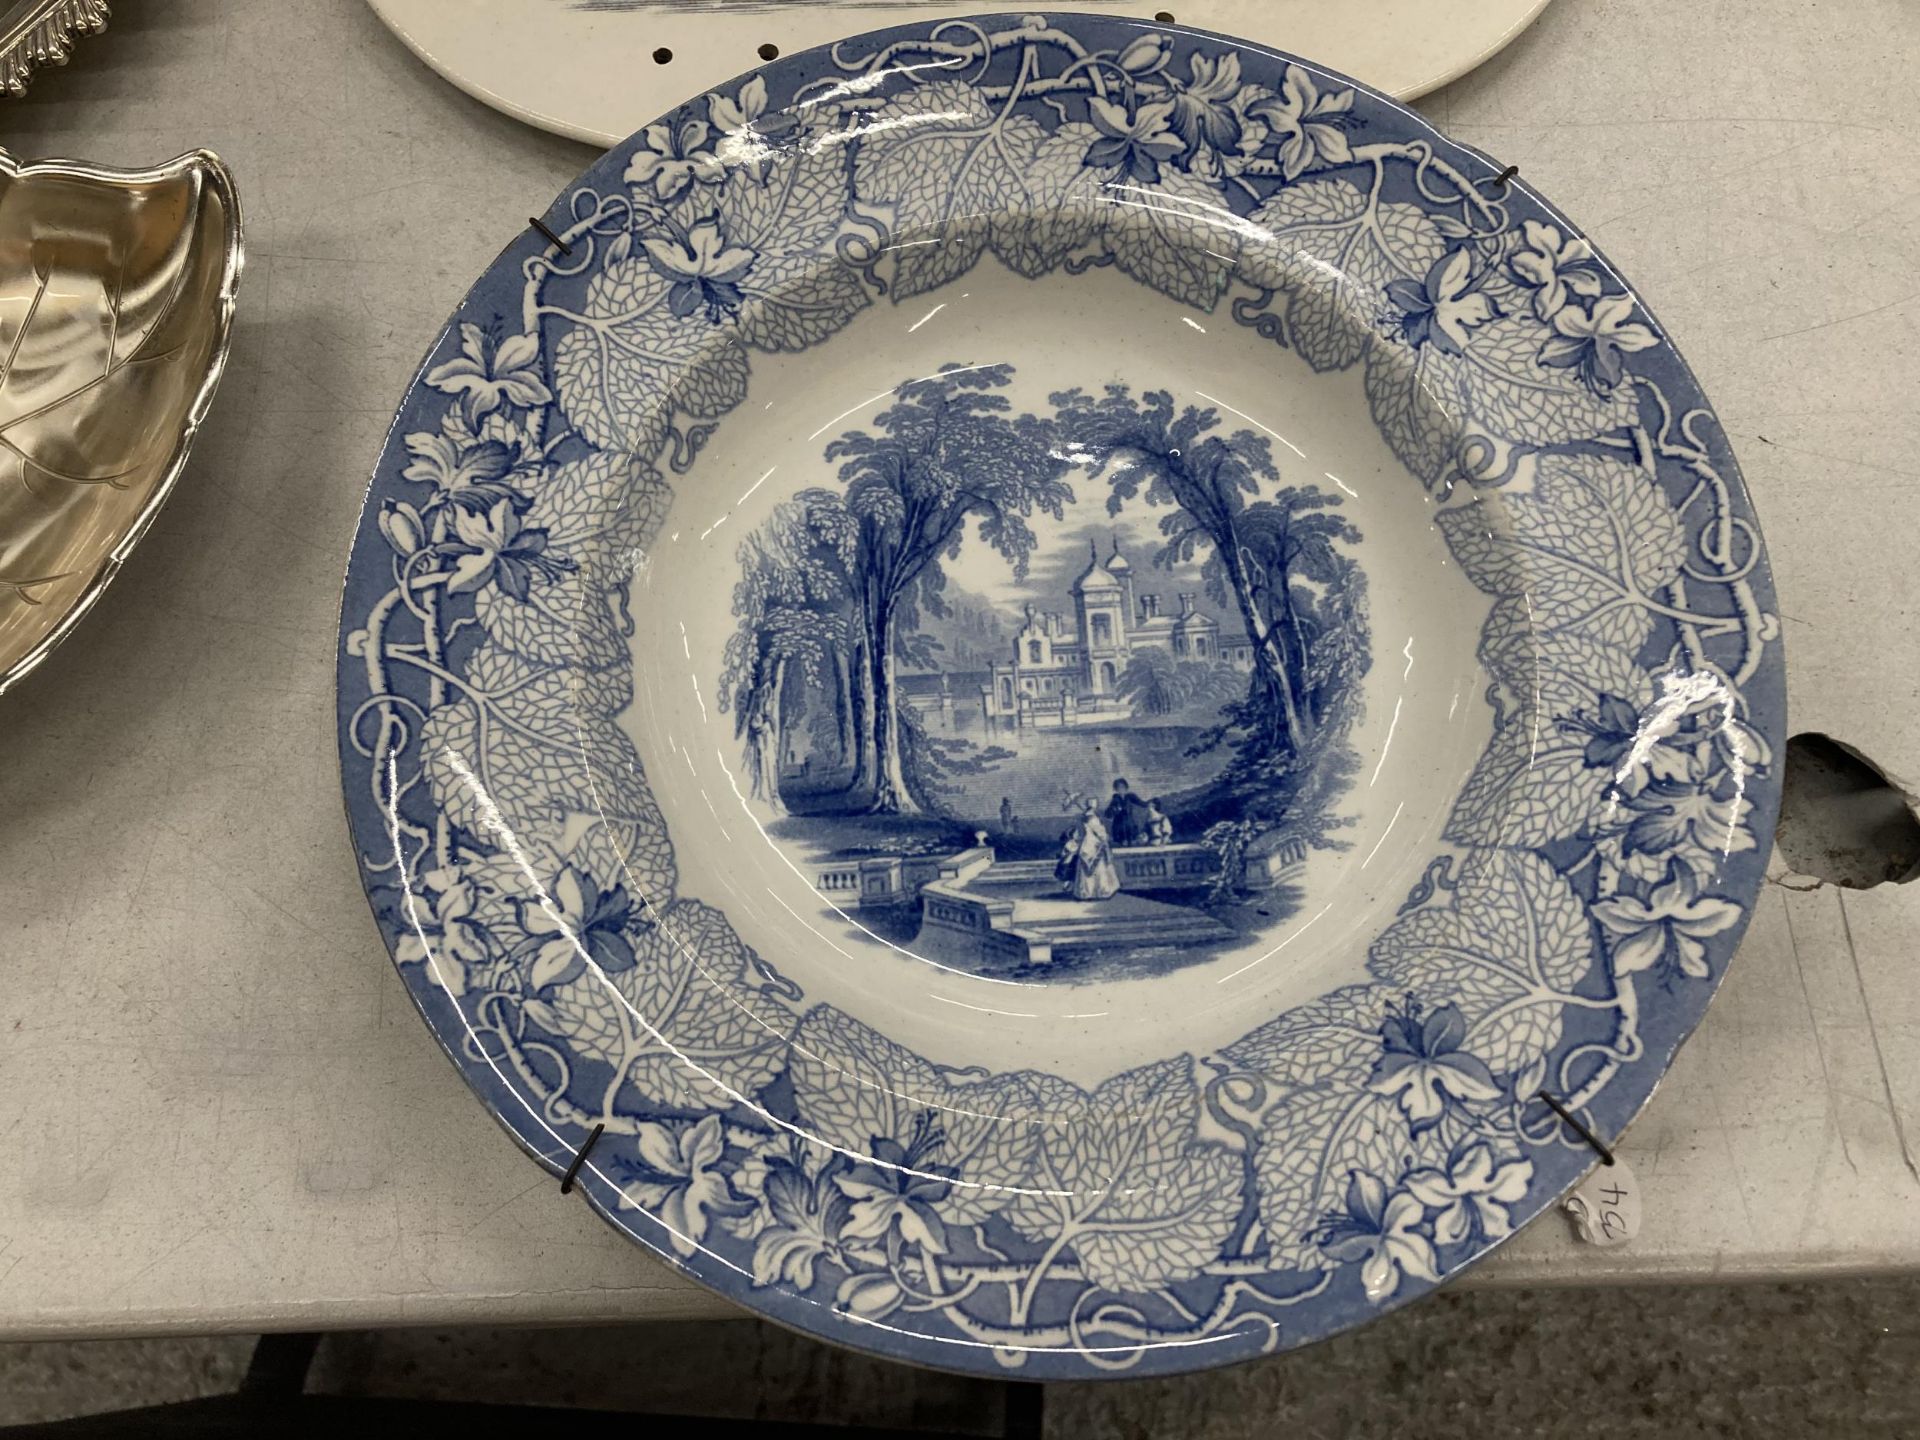 A LARGE VINTAGE CERAMIC PLATTER WITH FLORAL DESIGN, A BLUE AND WHITE BOWL AND A VINTAGE DRAINAGE - Image 2 of 5